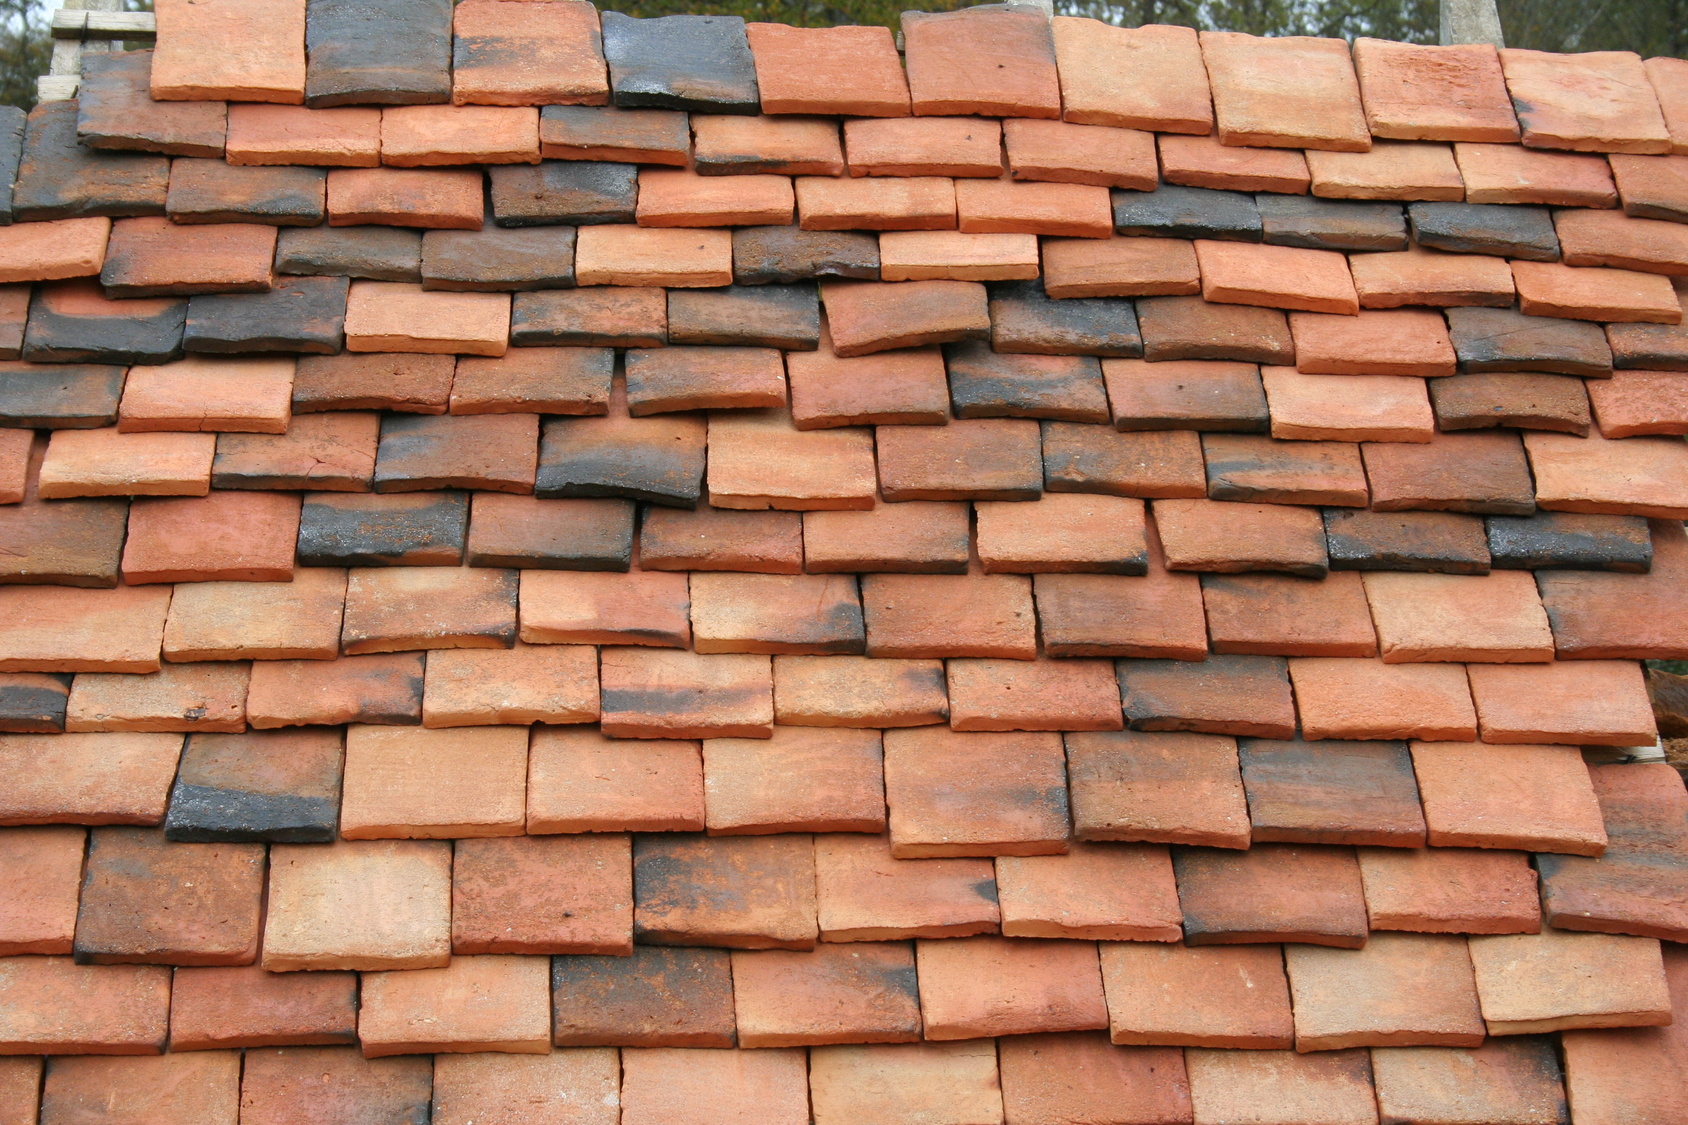 Roof Tile 129091 by StockProject1 on DeviantArt